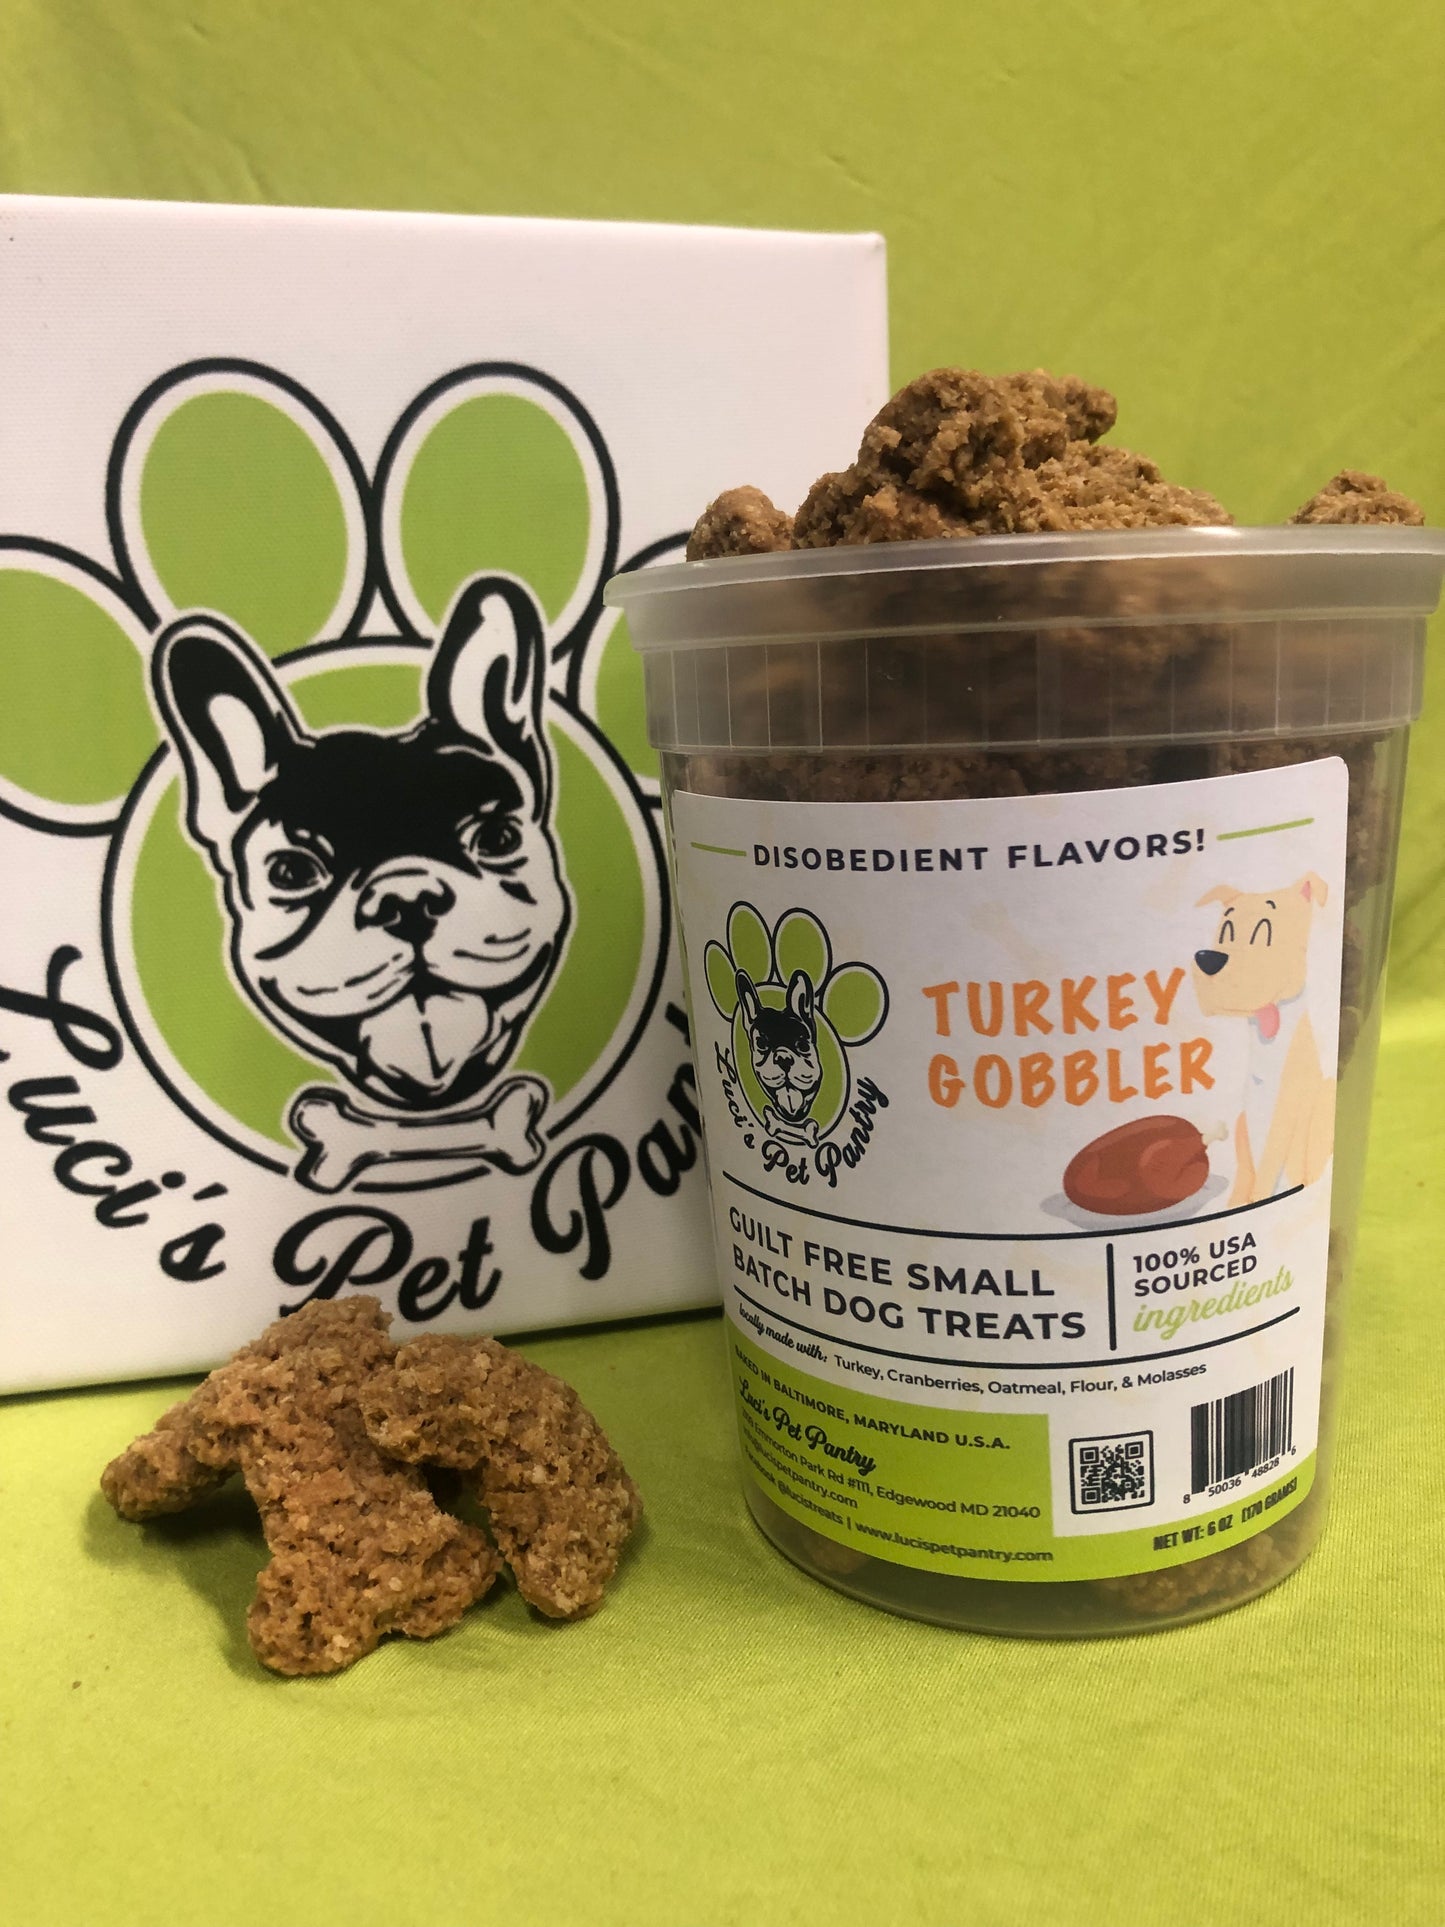 Turkey Gobbler - All Natural "Turkey & Cranberry" Dog & Puppy Treats - Disobedient Tub of Biscuits